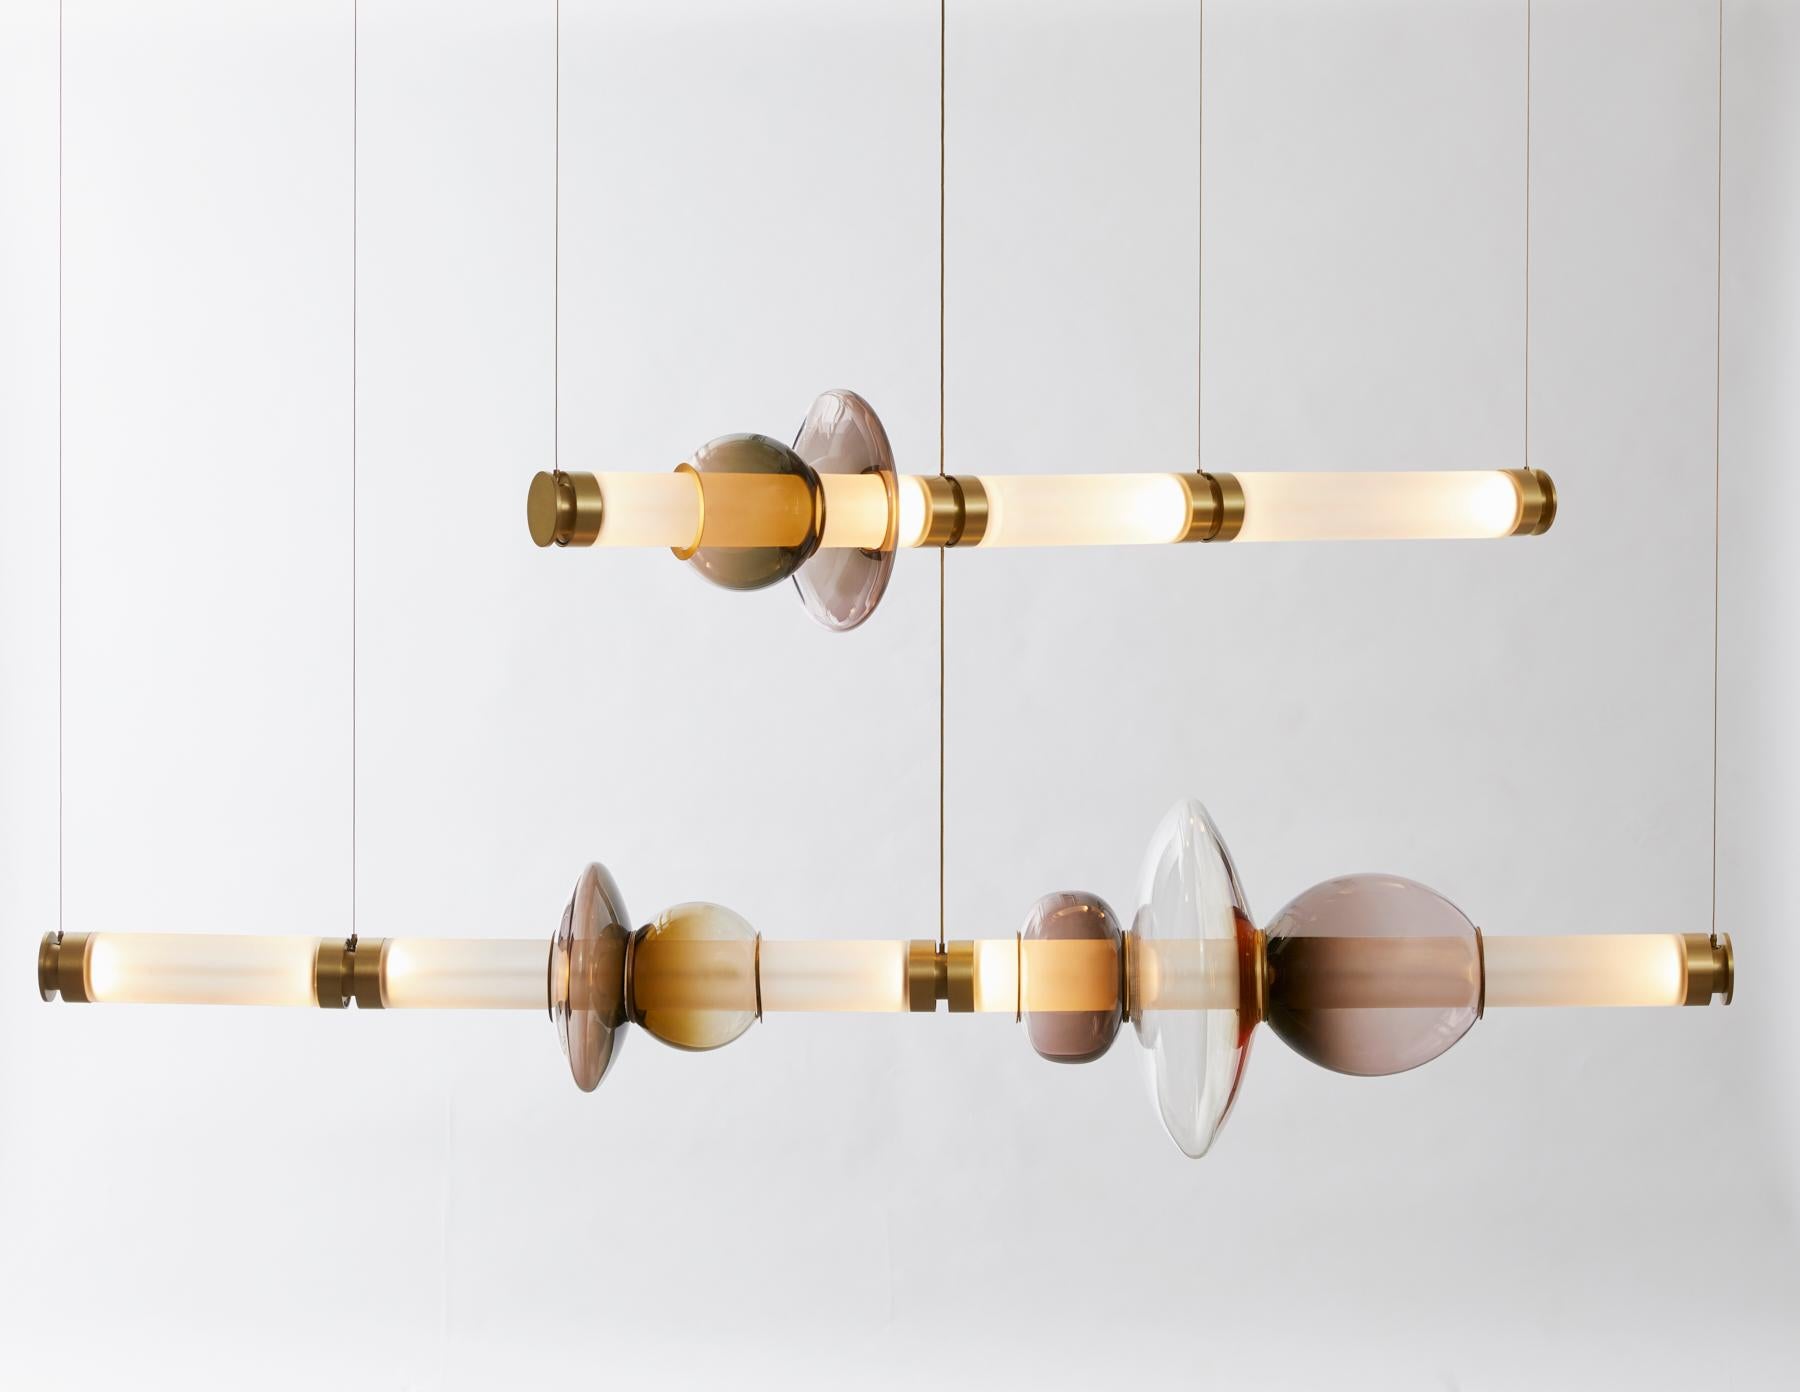 A lighting system with infinite interpretations, the Luna Chandelier 2 Tier  is a synergy of color, shape, and refracted light. Inspired by a lunar halo, the modular light fixture grows in every direction as its assembly system stems horizontally or